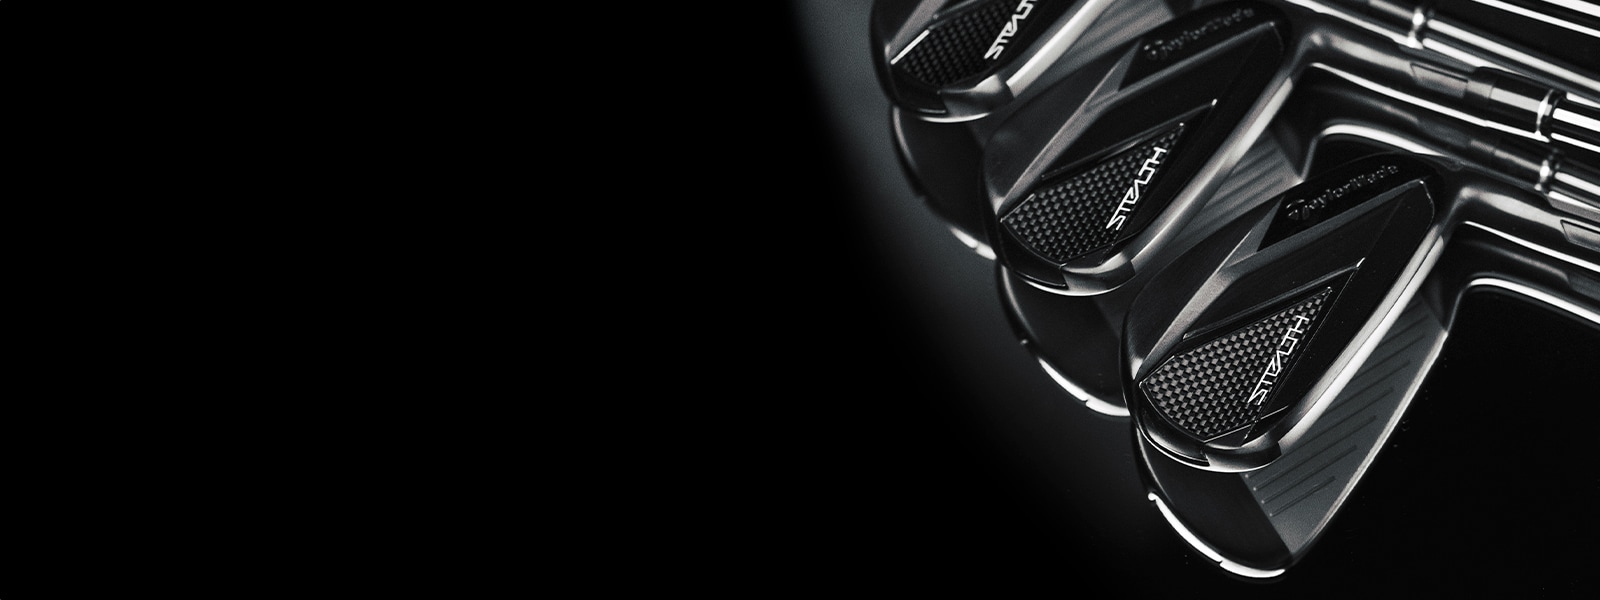 An image of TaylorMade Stealth irons.